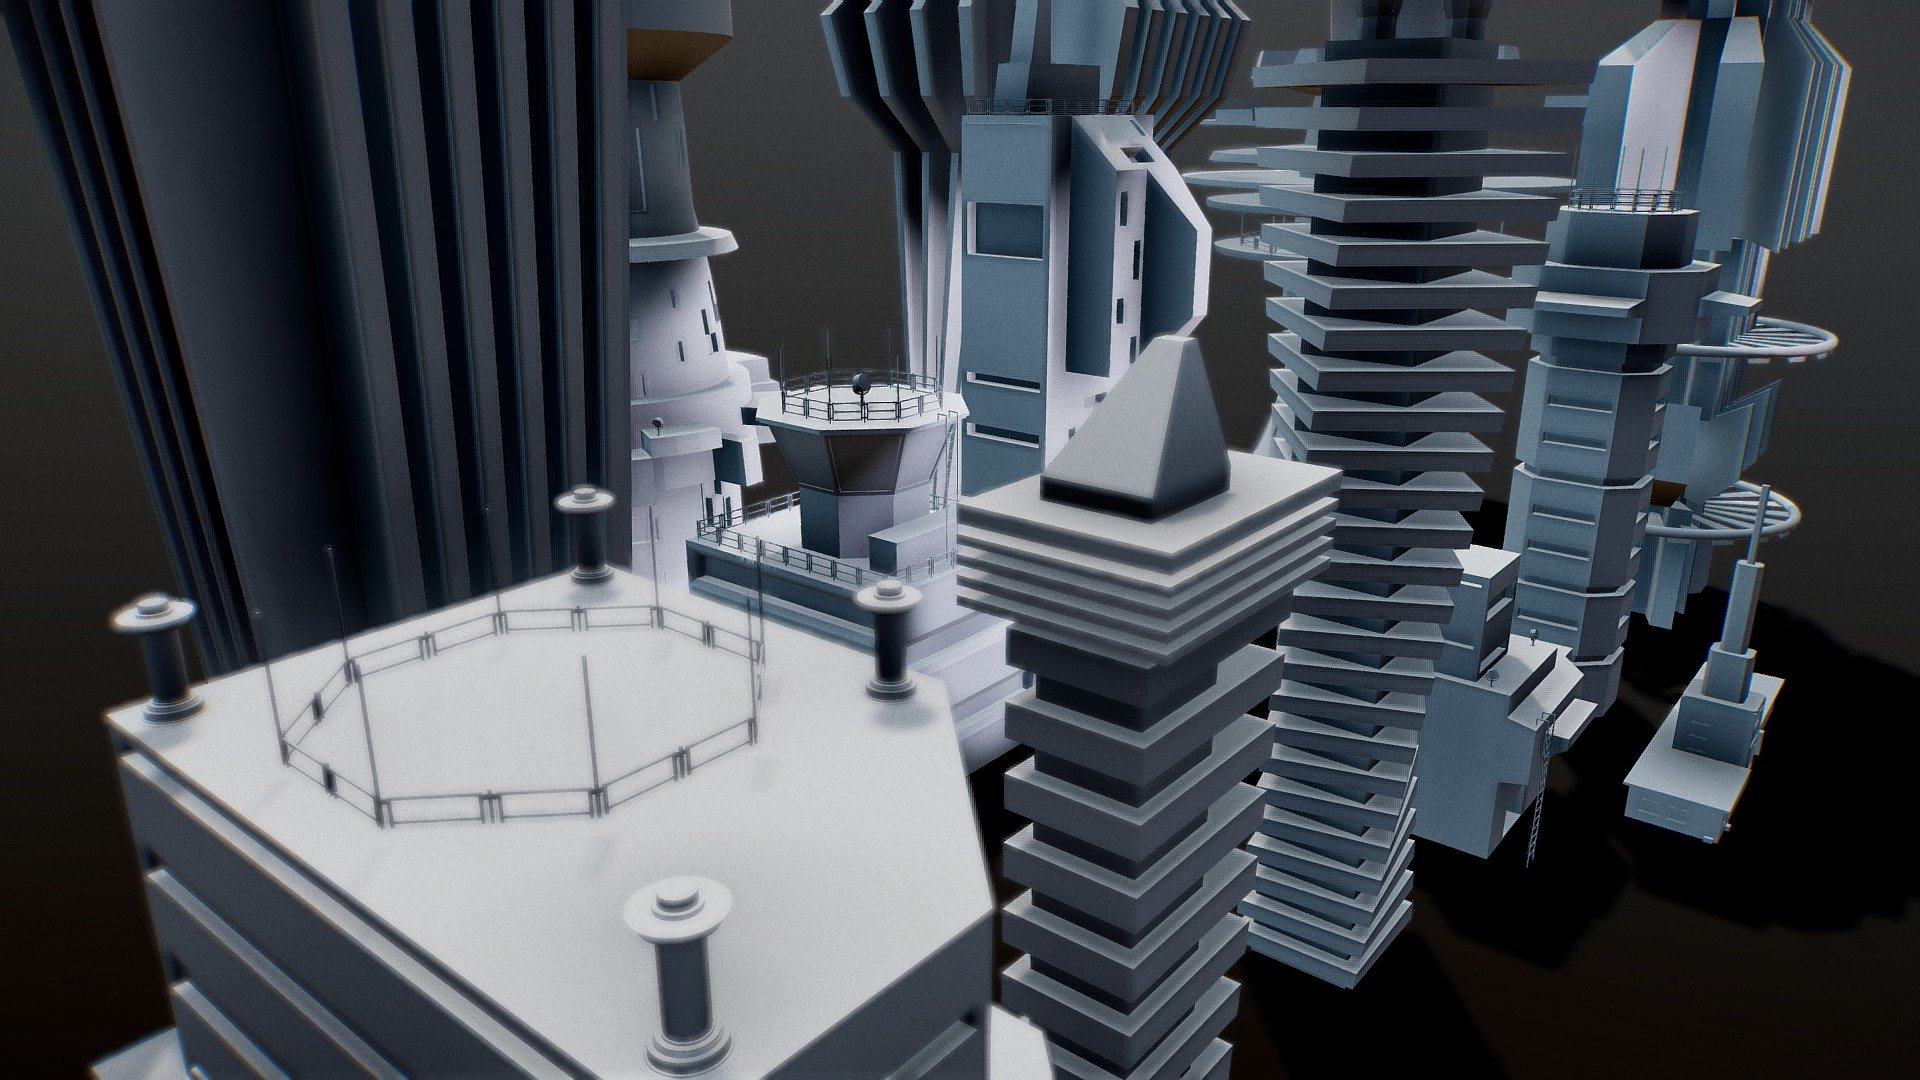 Sci Fi Kitbash Low Poly Buildings D Model By Gilded Gilded